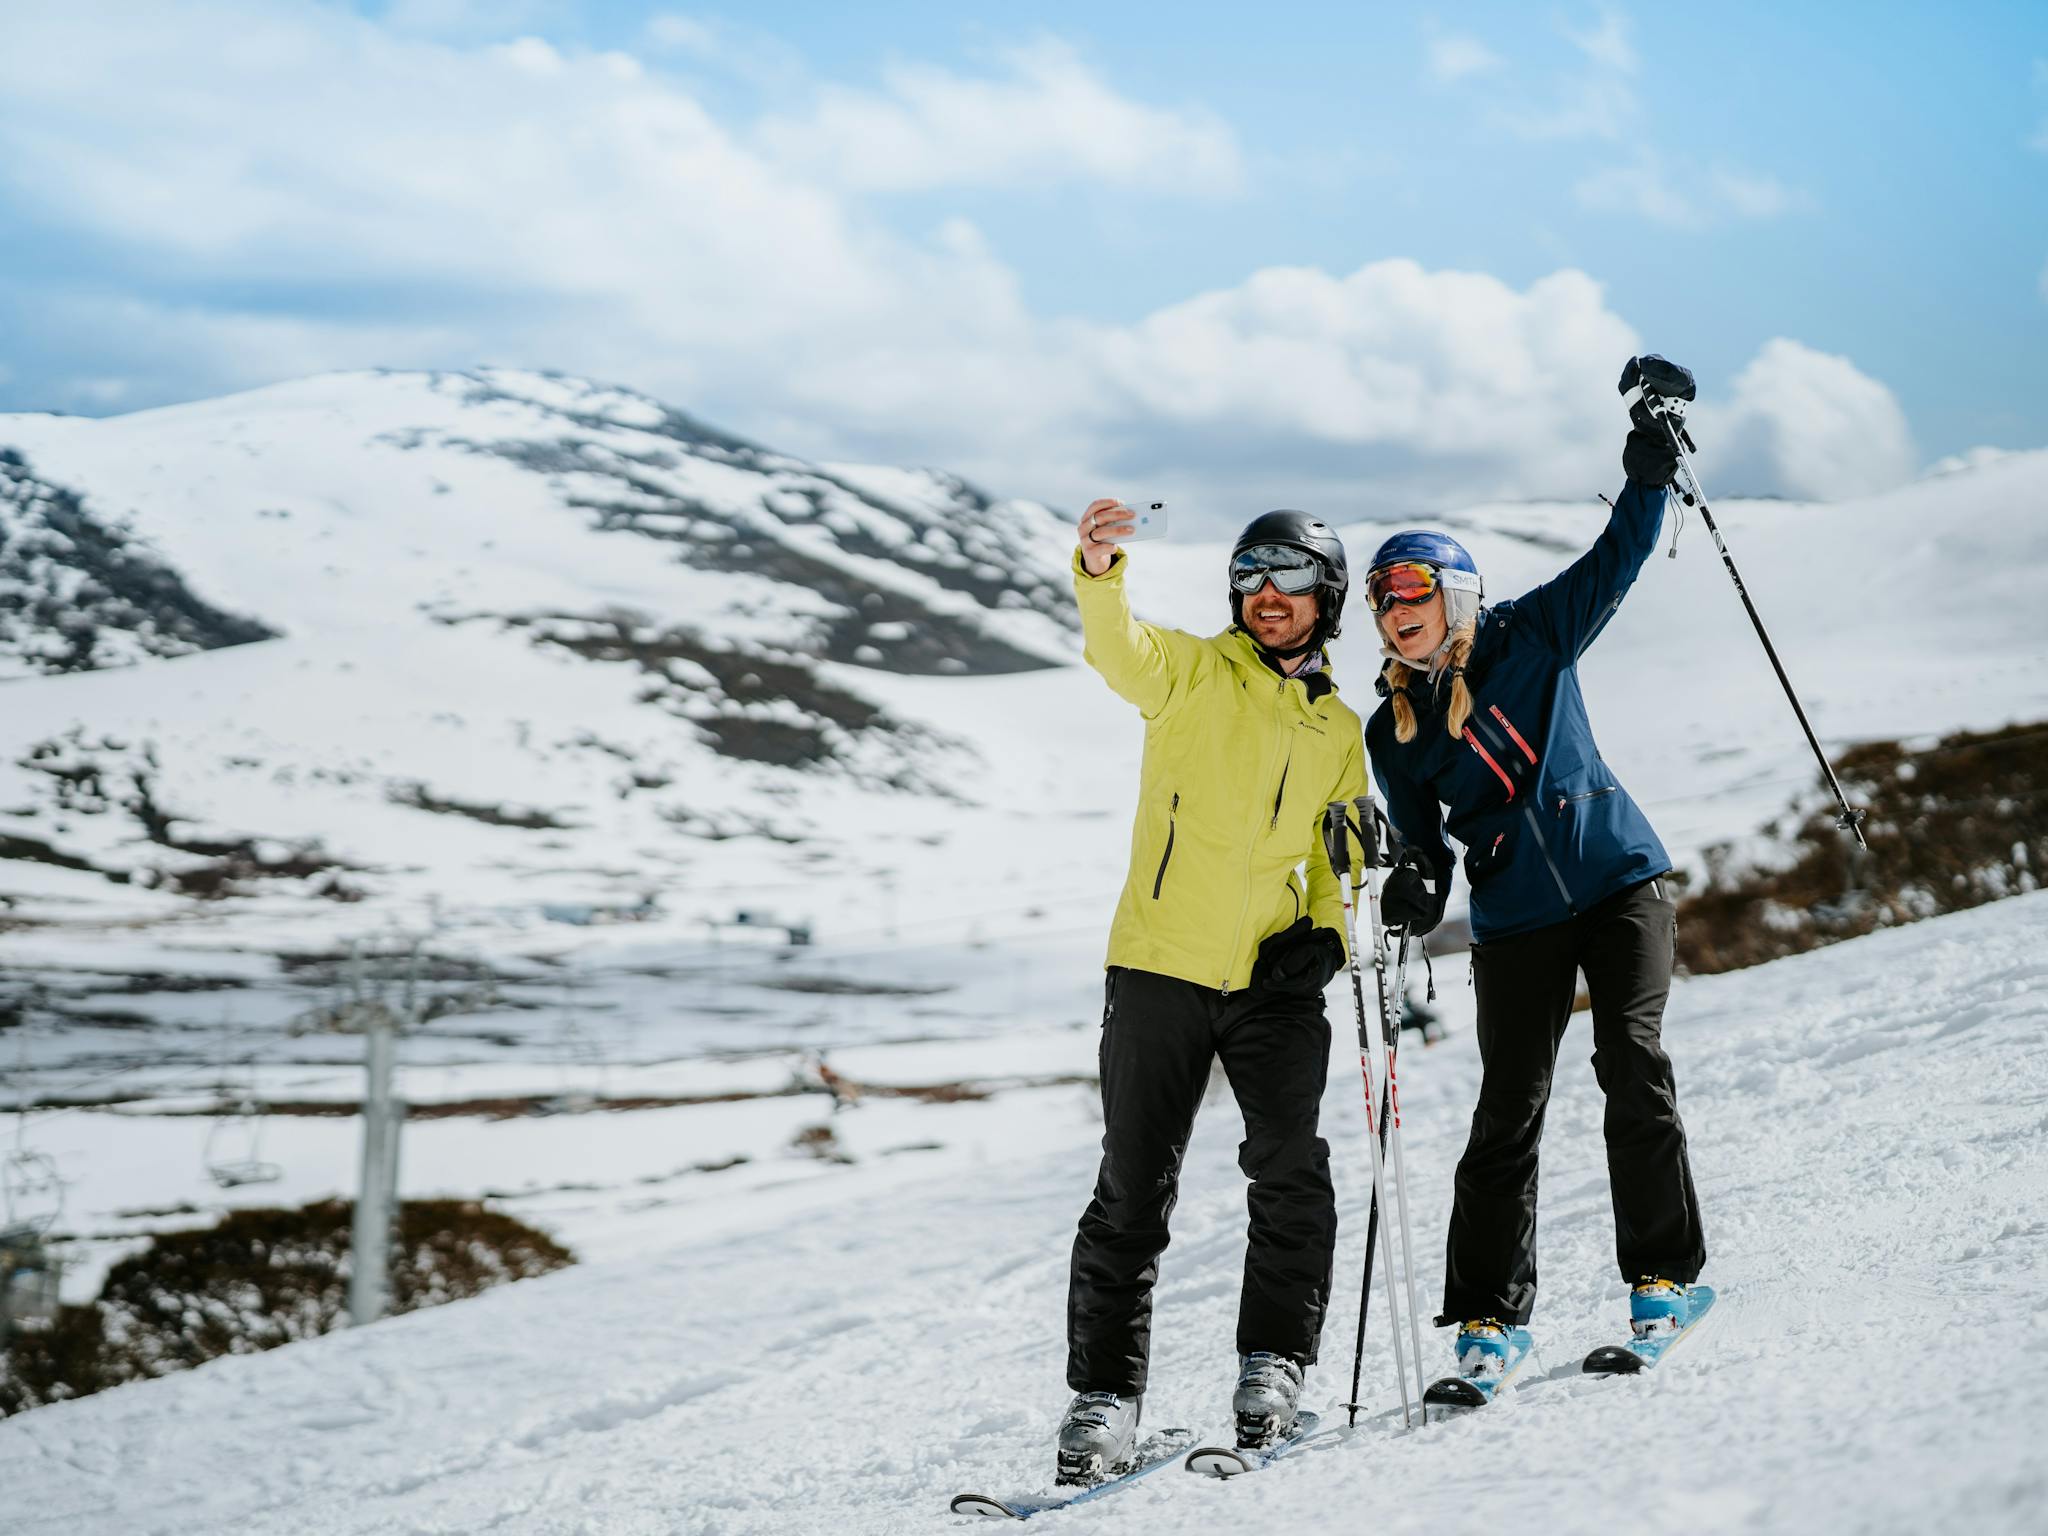 Two skiers posing for a happy photo on the slopes at Falls Creek